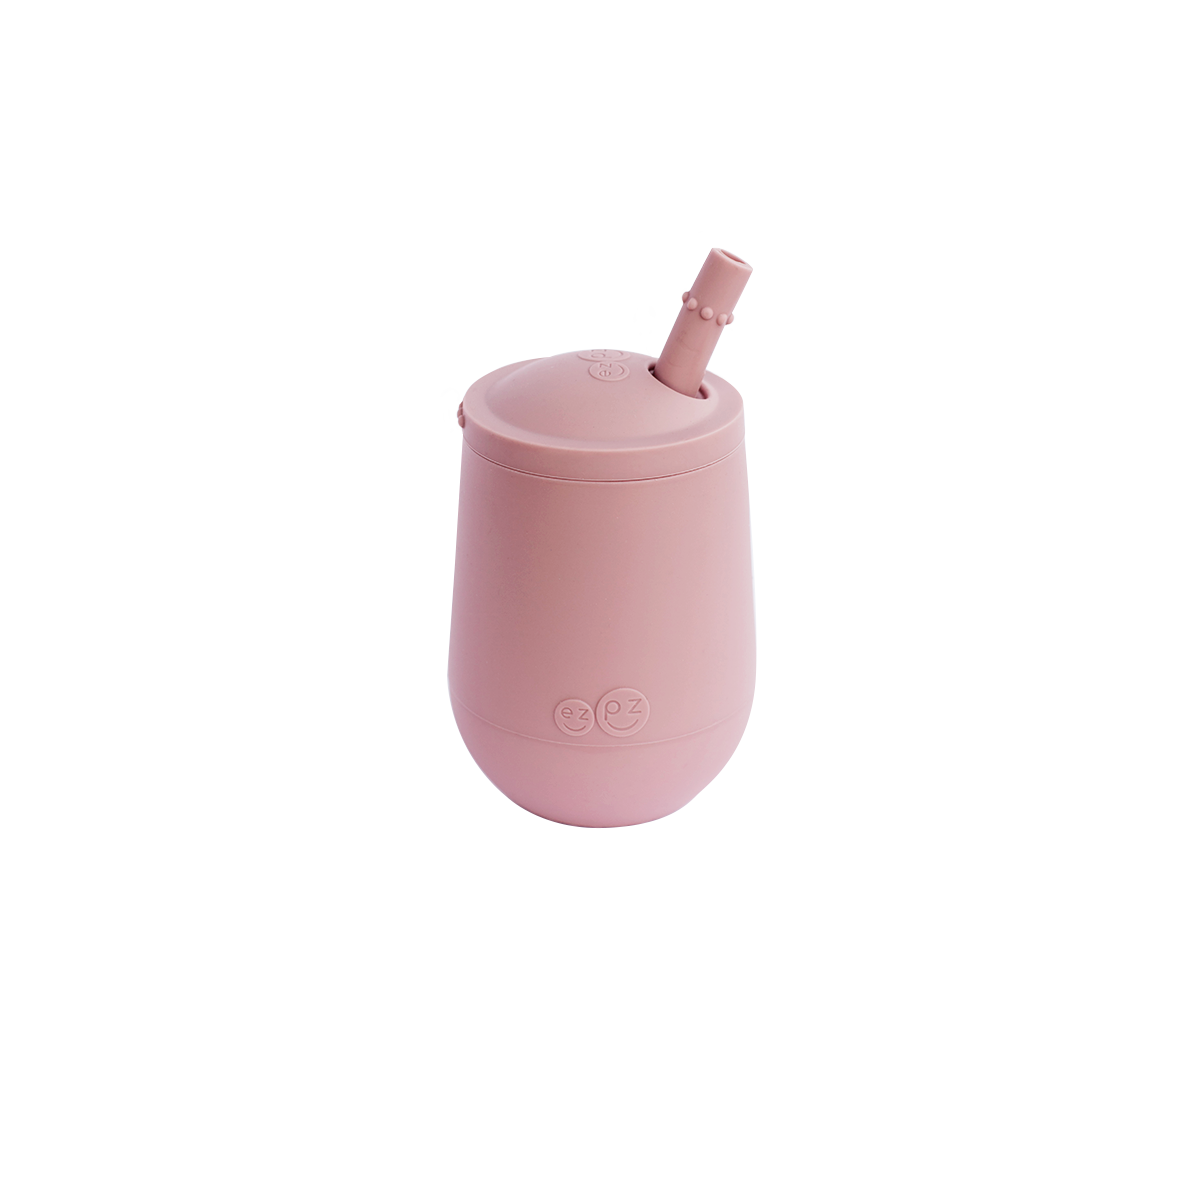 Ezpz Blush mini cup and straw training system against white backdrop